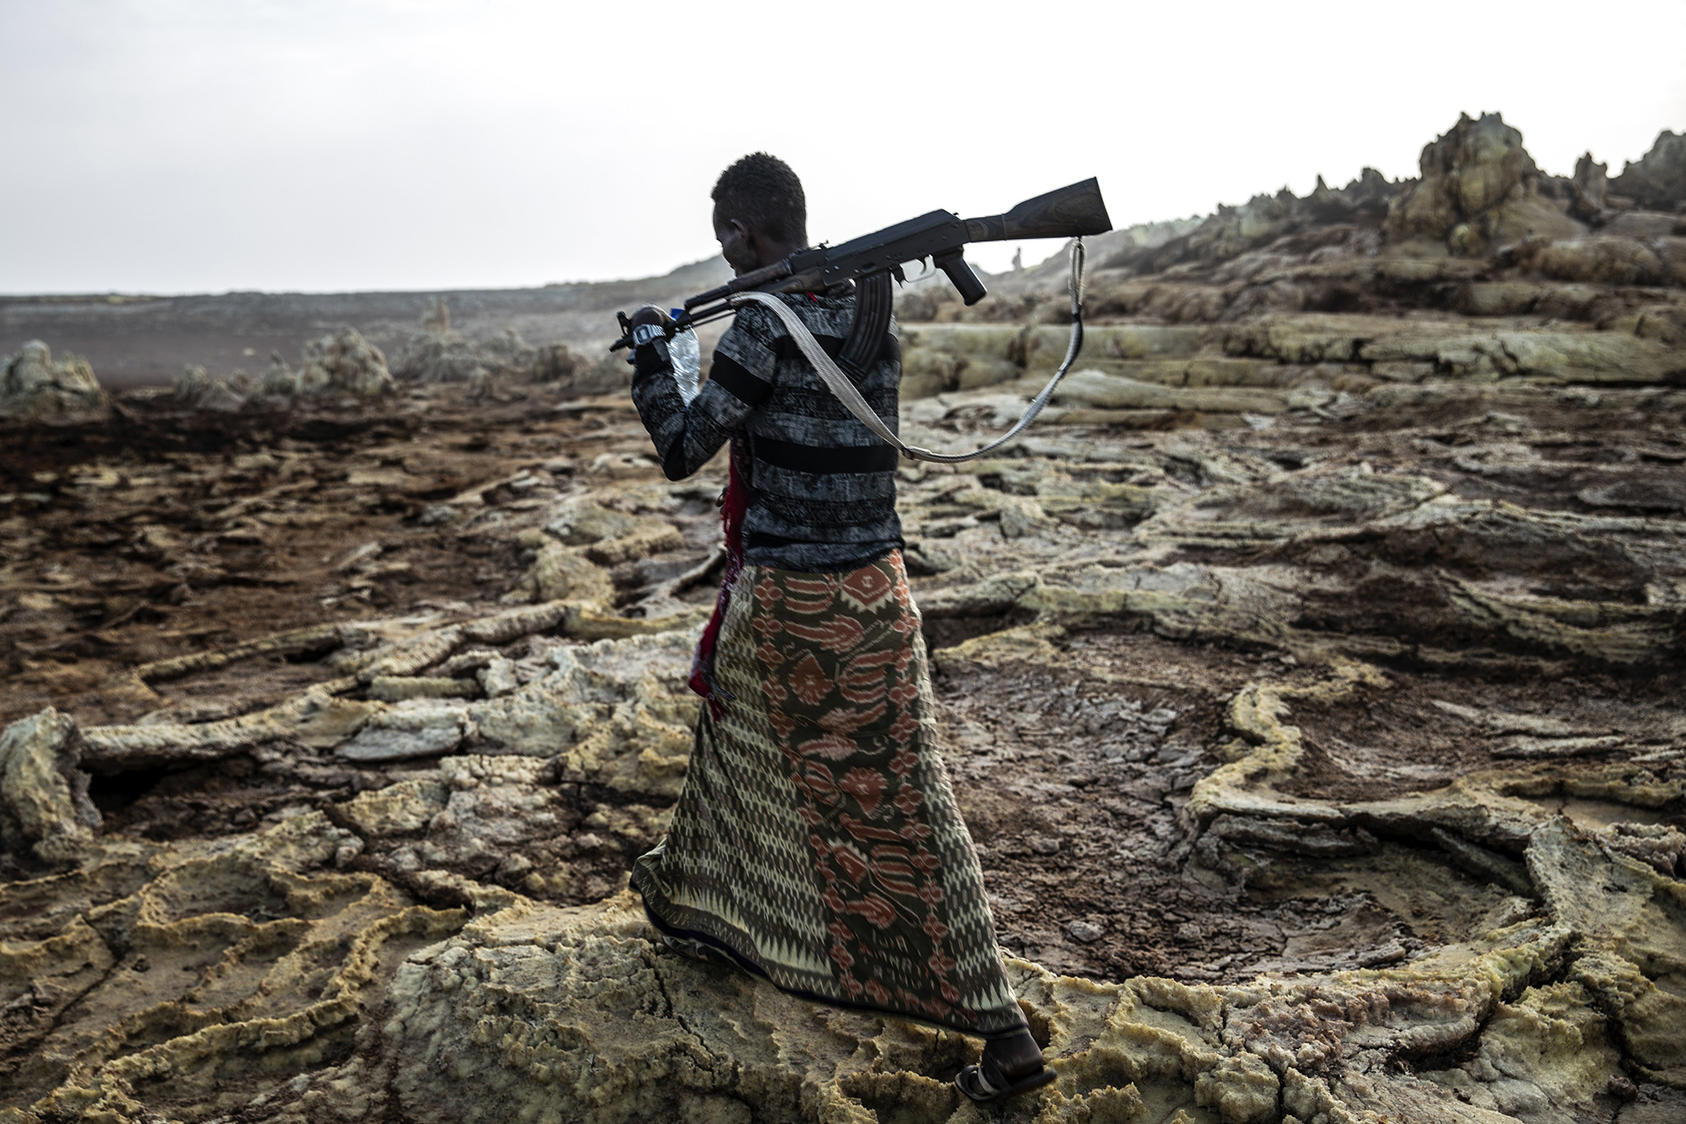 A militia fighter in the region of Afar, in northern Ethiopia. November 10, 2019. (Finbarr O'Reilly/The New York Times)